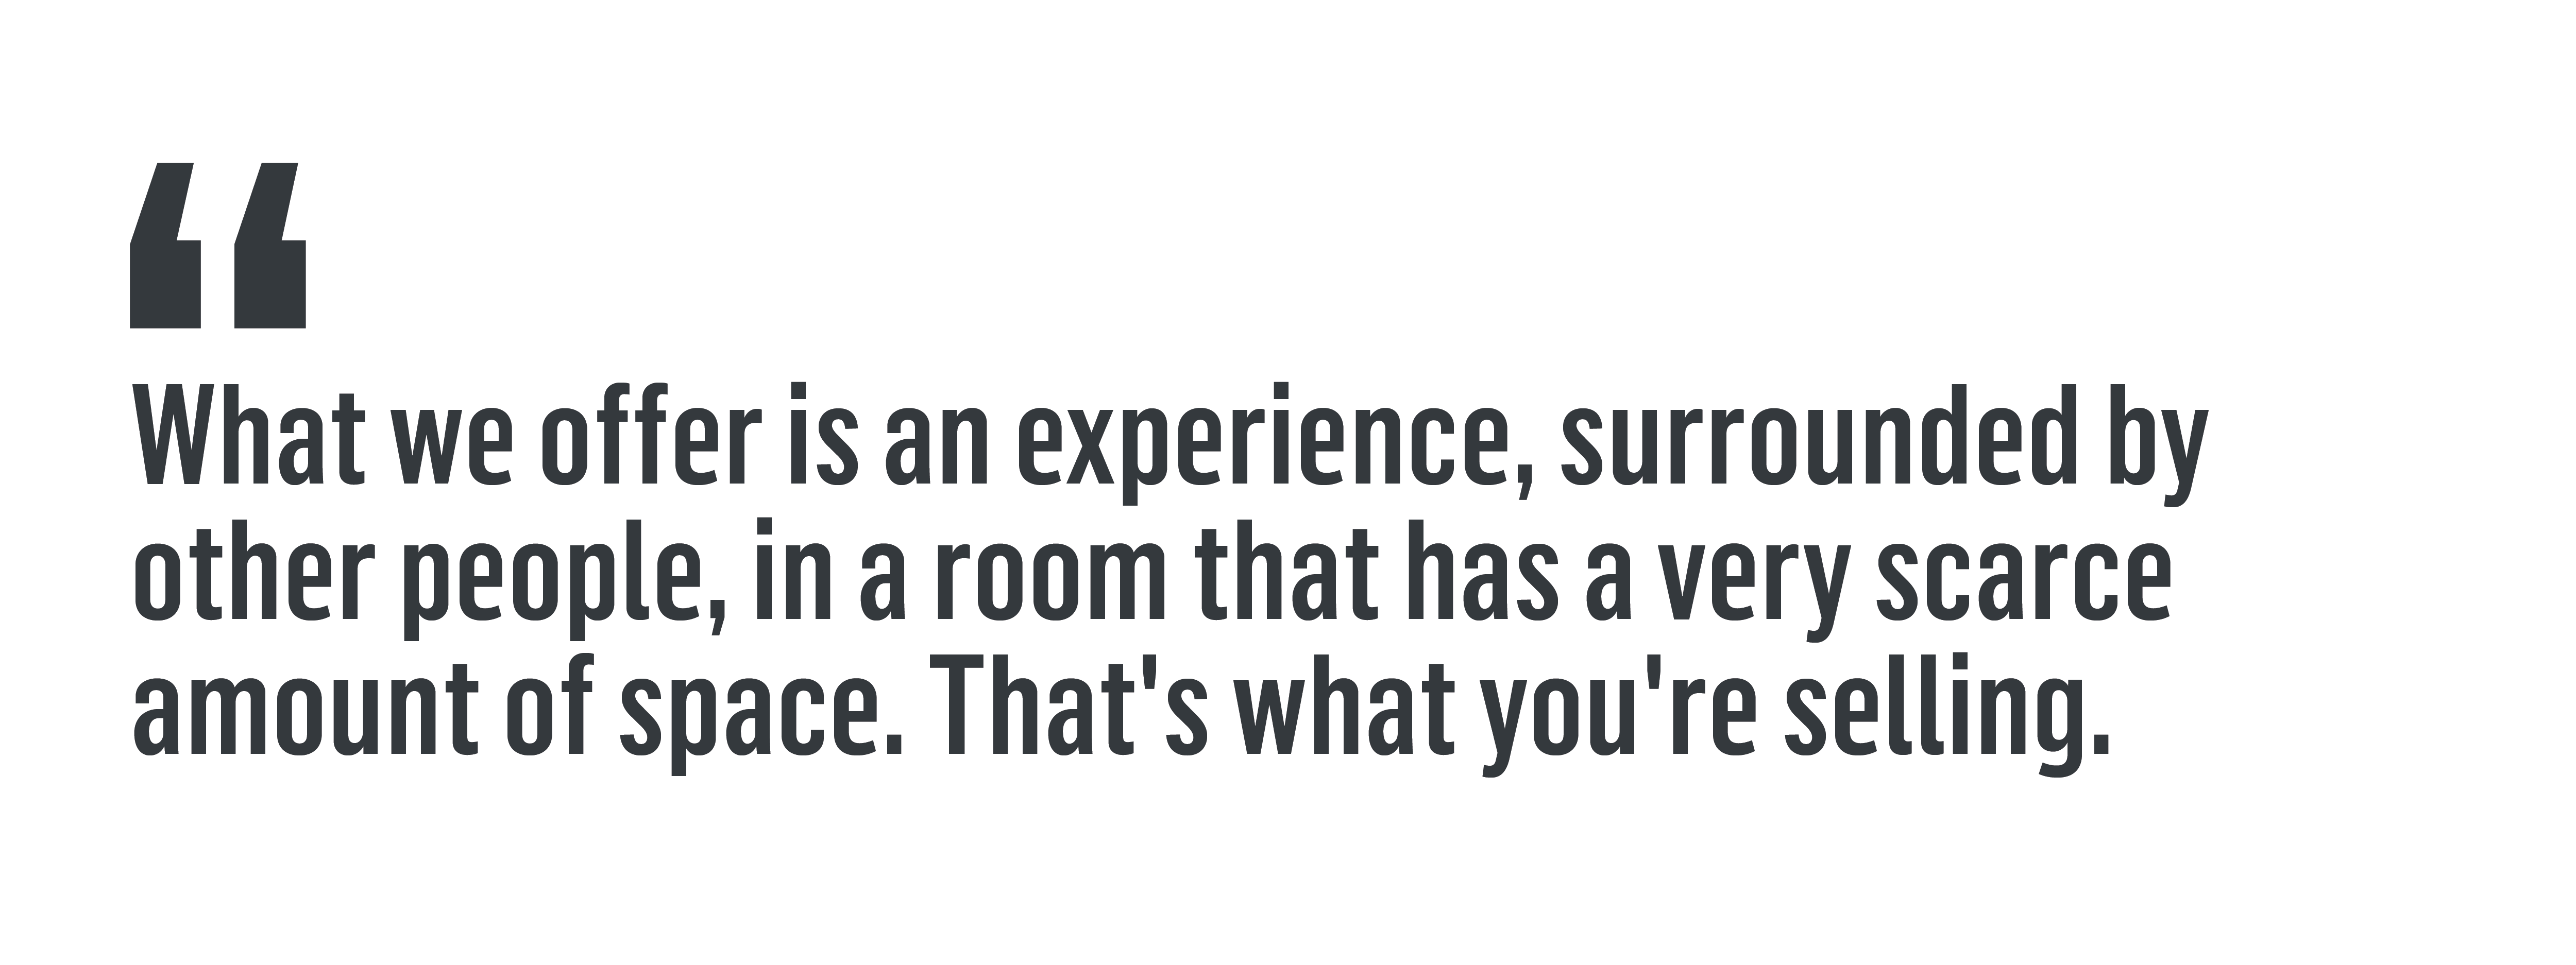 “What we offer is an experience, surrounded by other people, in a room that has a very scarce amount of space. That's what you're selling.”